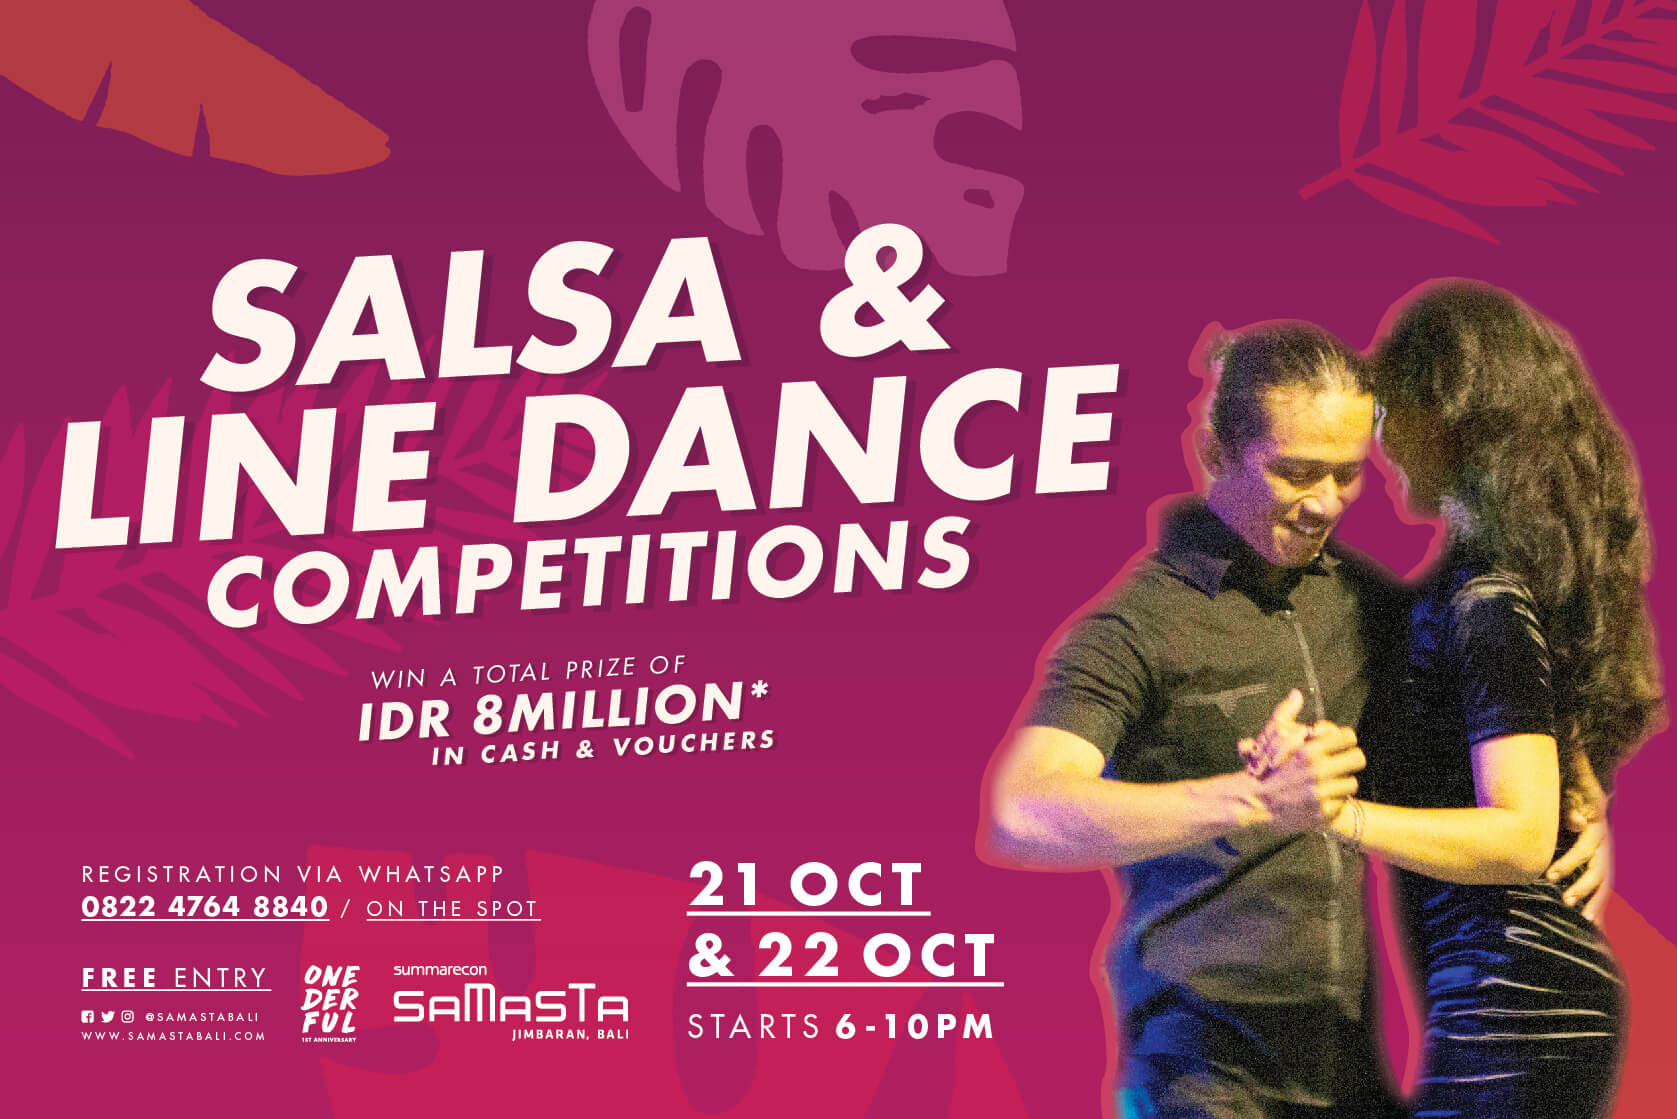 Salsa & Line Dance Competitions